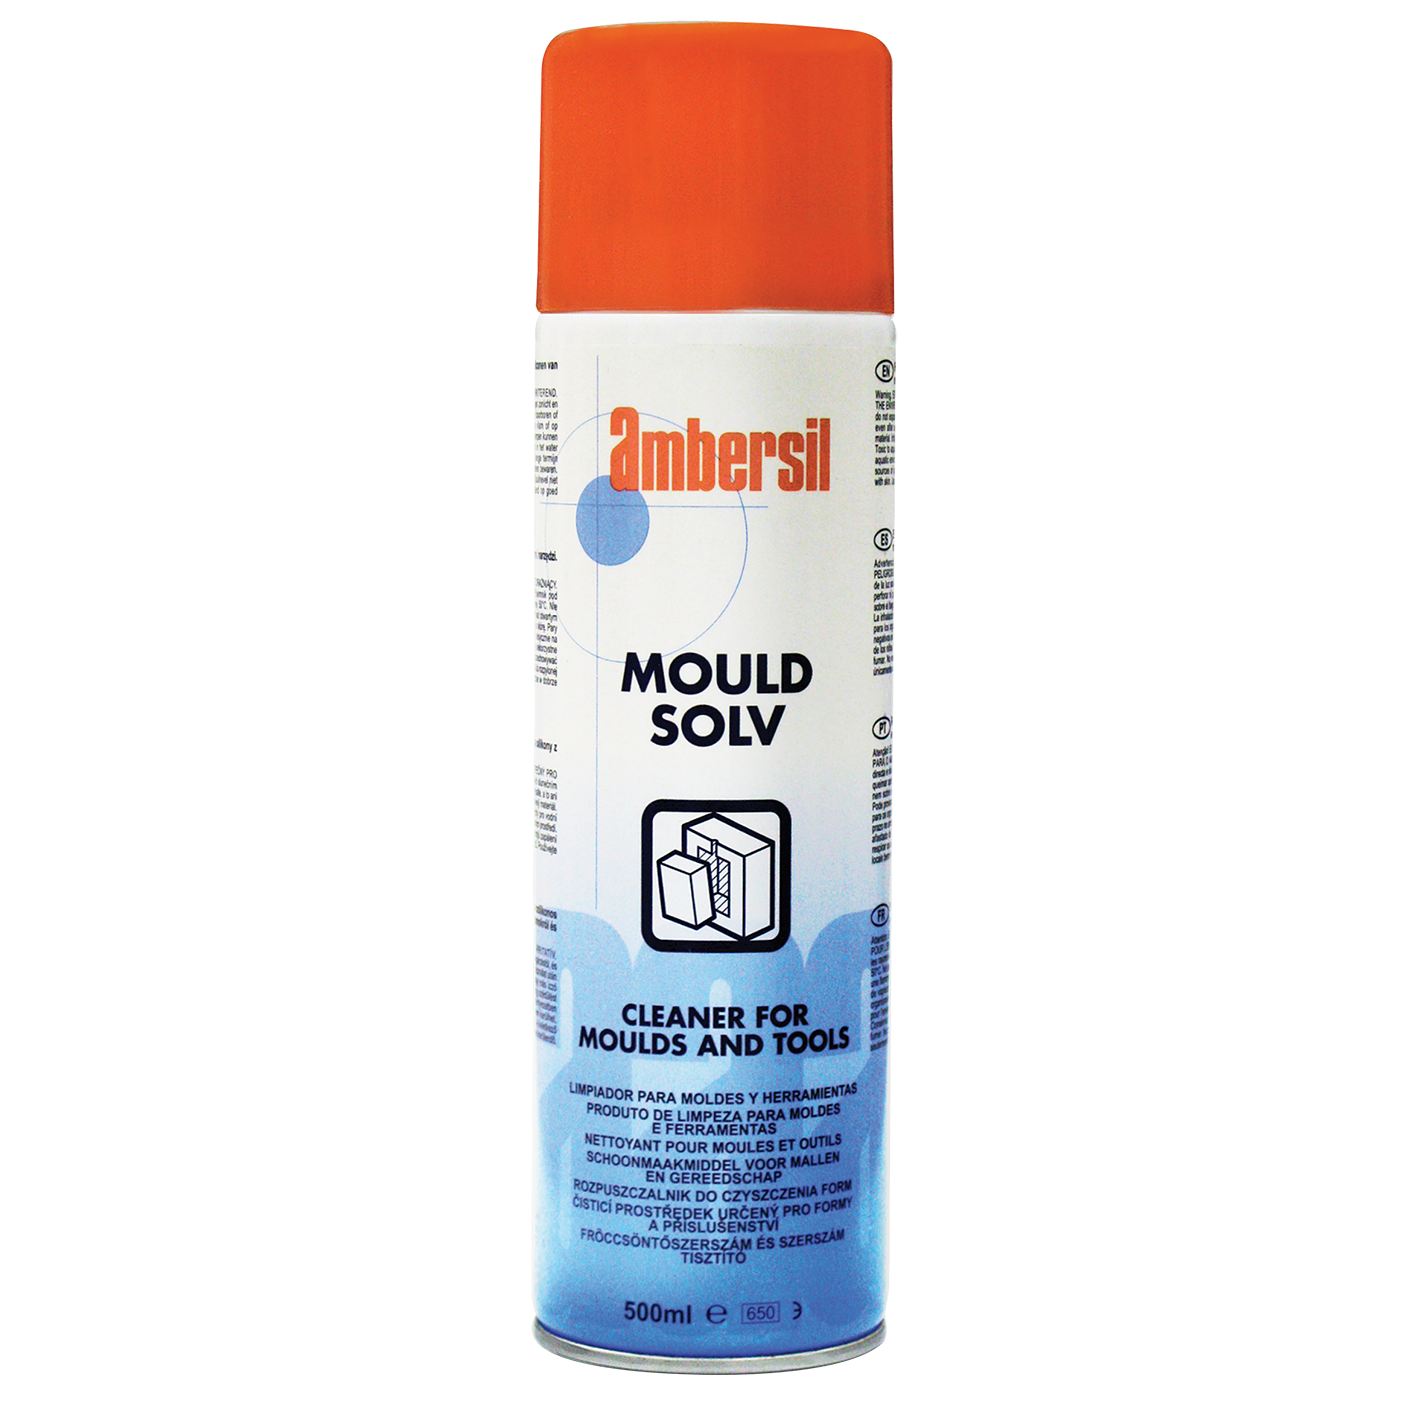 CLEANER FOR MOULDS AND TOOLS